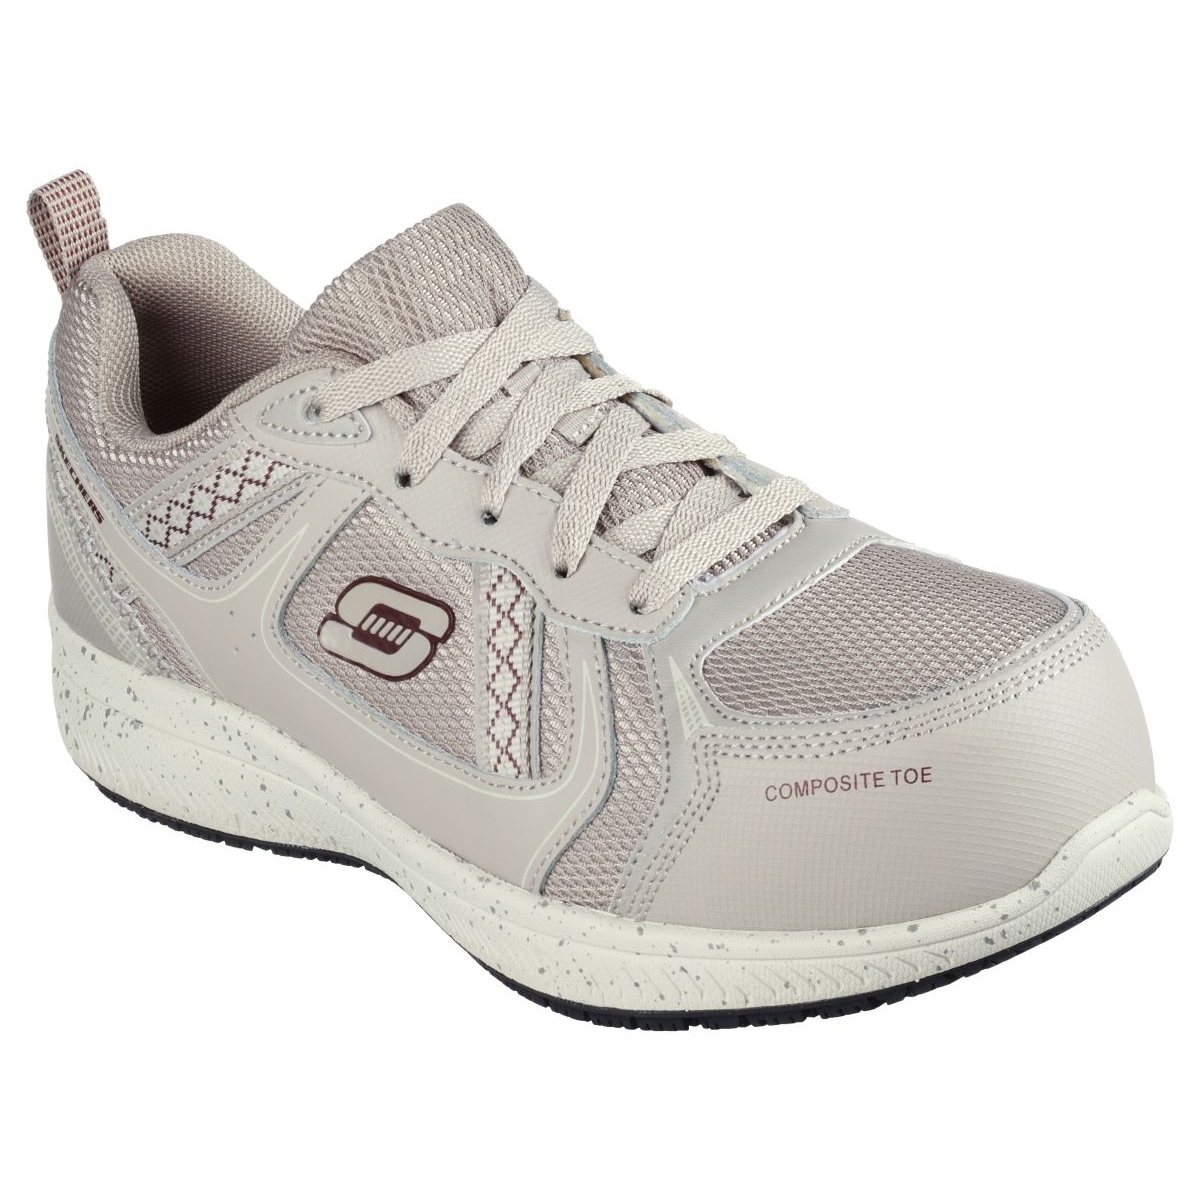 Skechers ELG-5 - Composite Toe TAUPE - TAUPE, 8.5